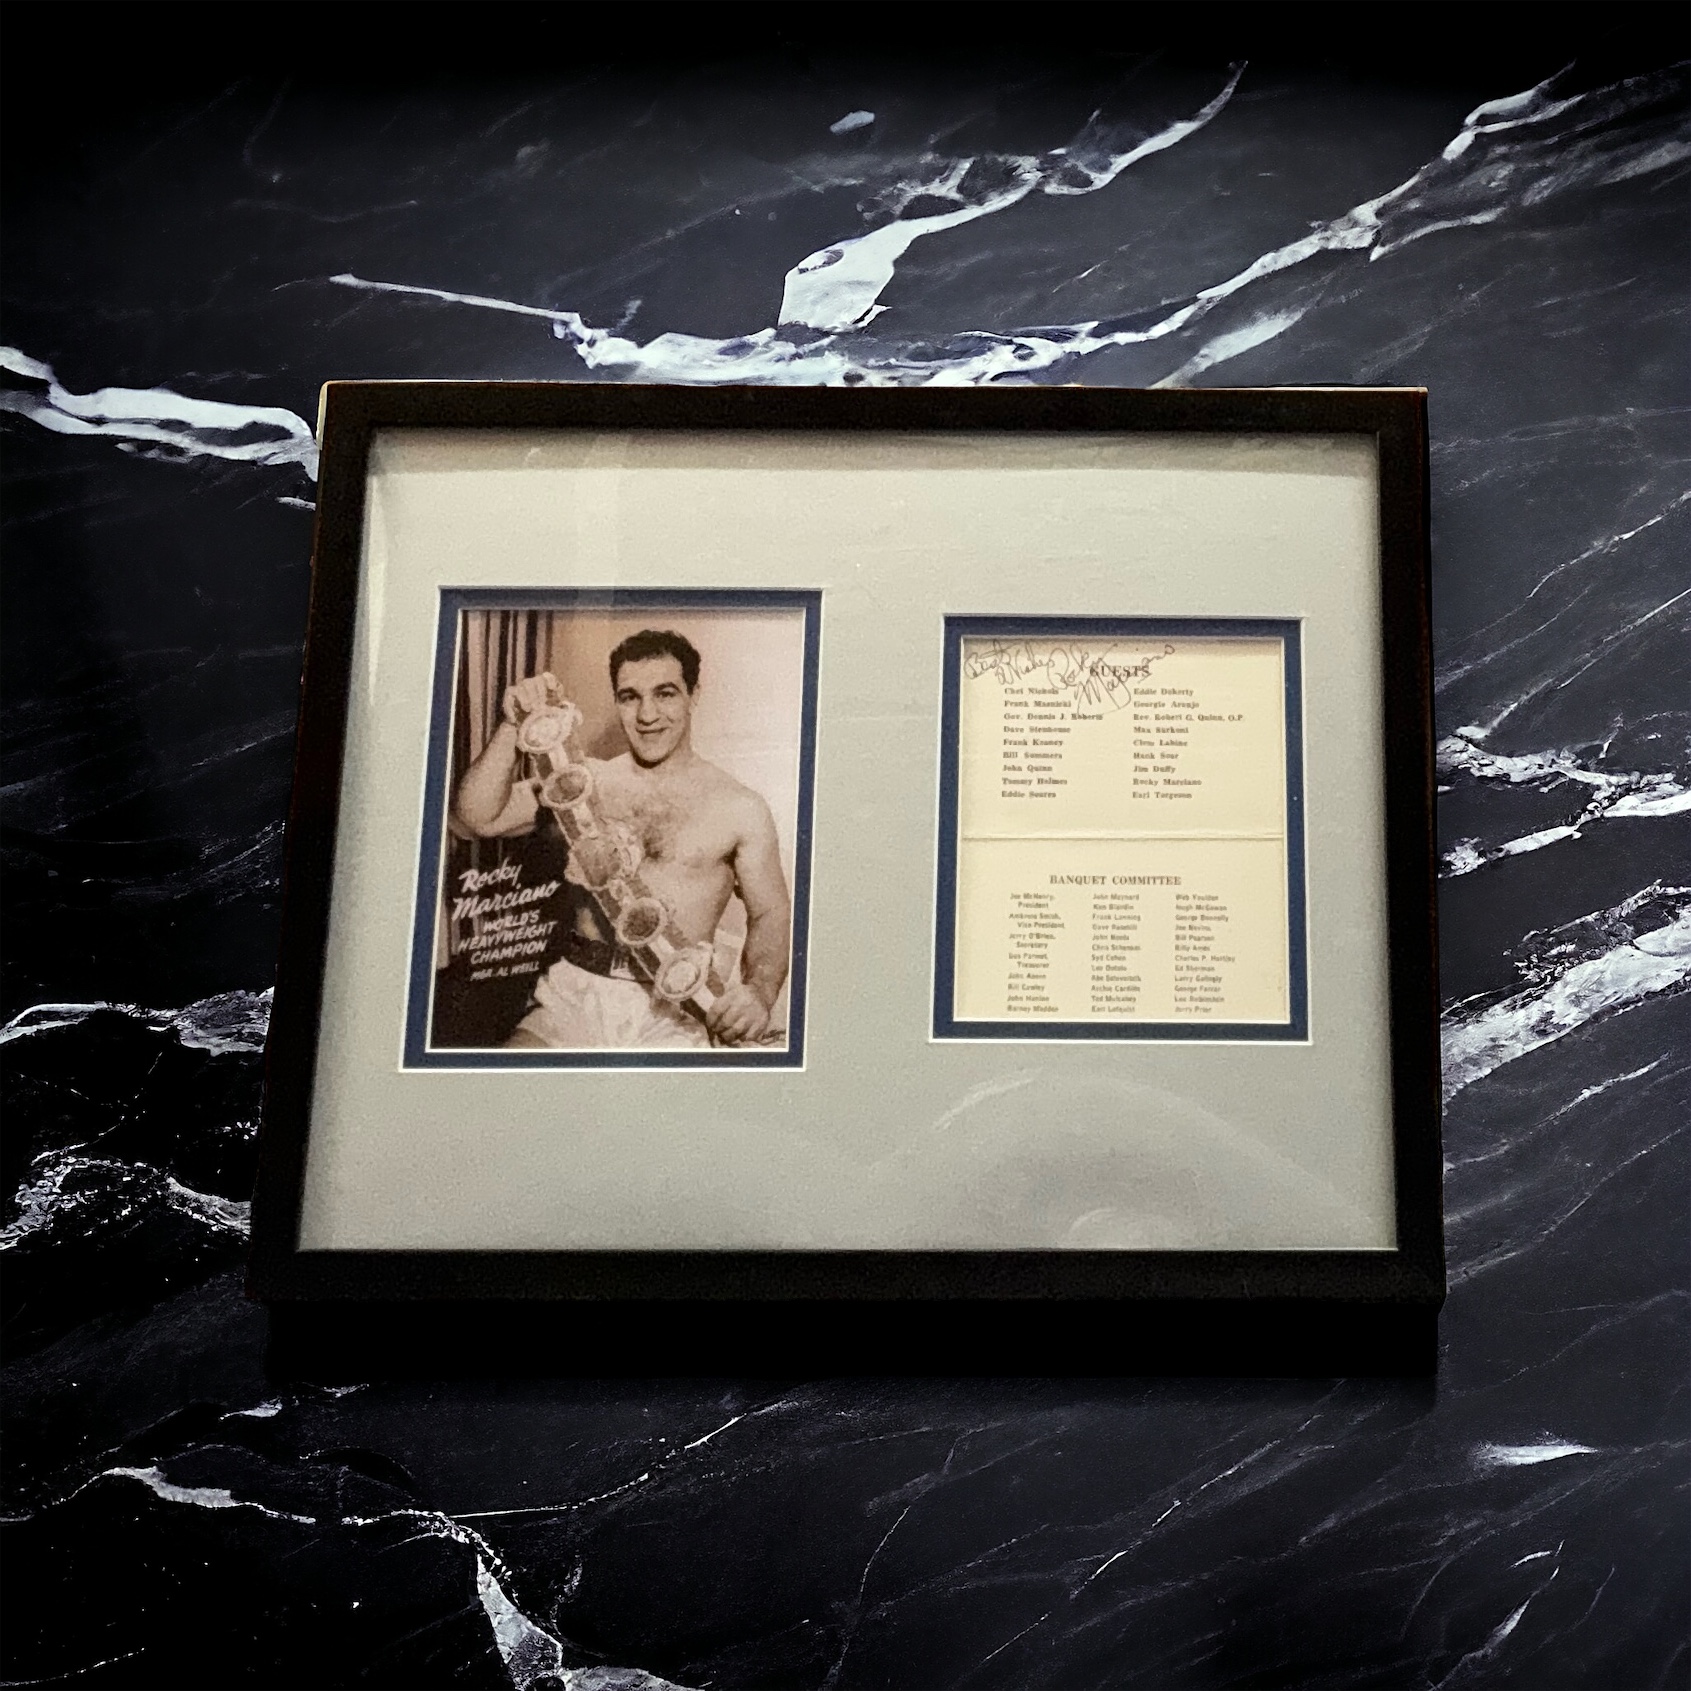 Rocky Marciano 15x12 inch framed and mounted signature piece includes signed banquet menu and